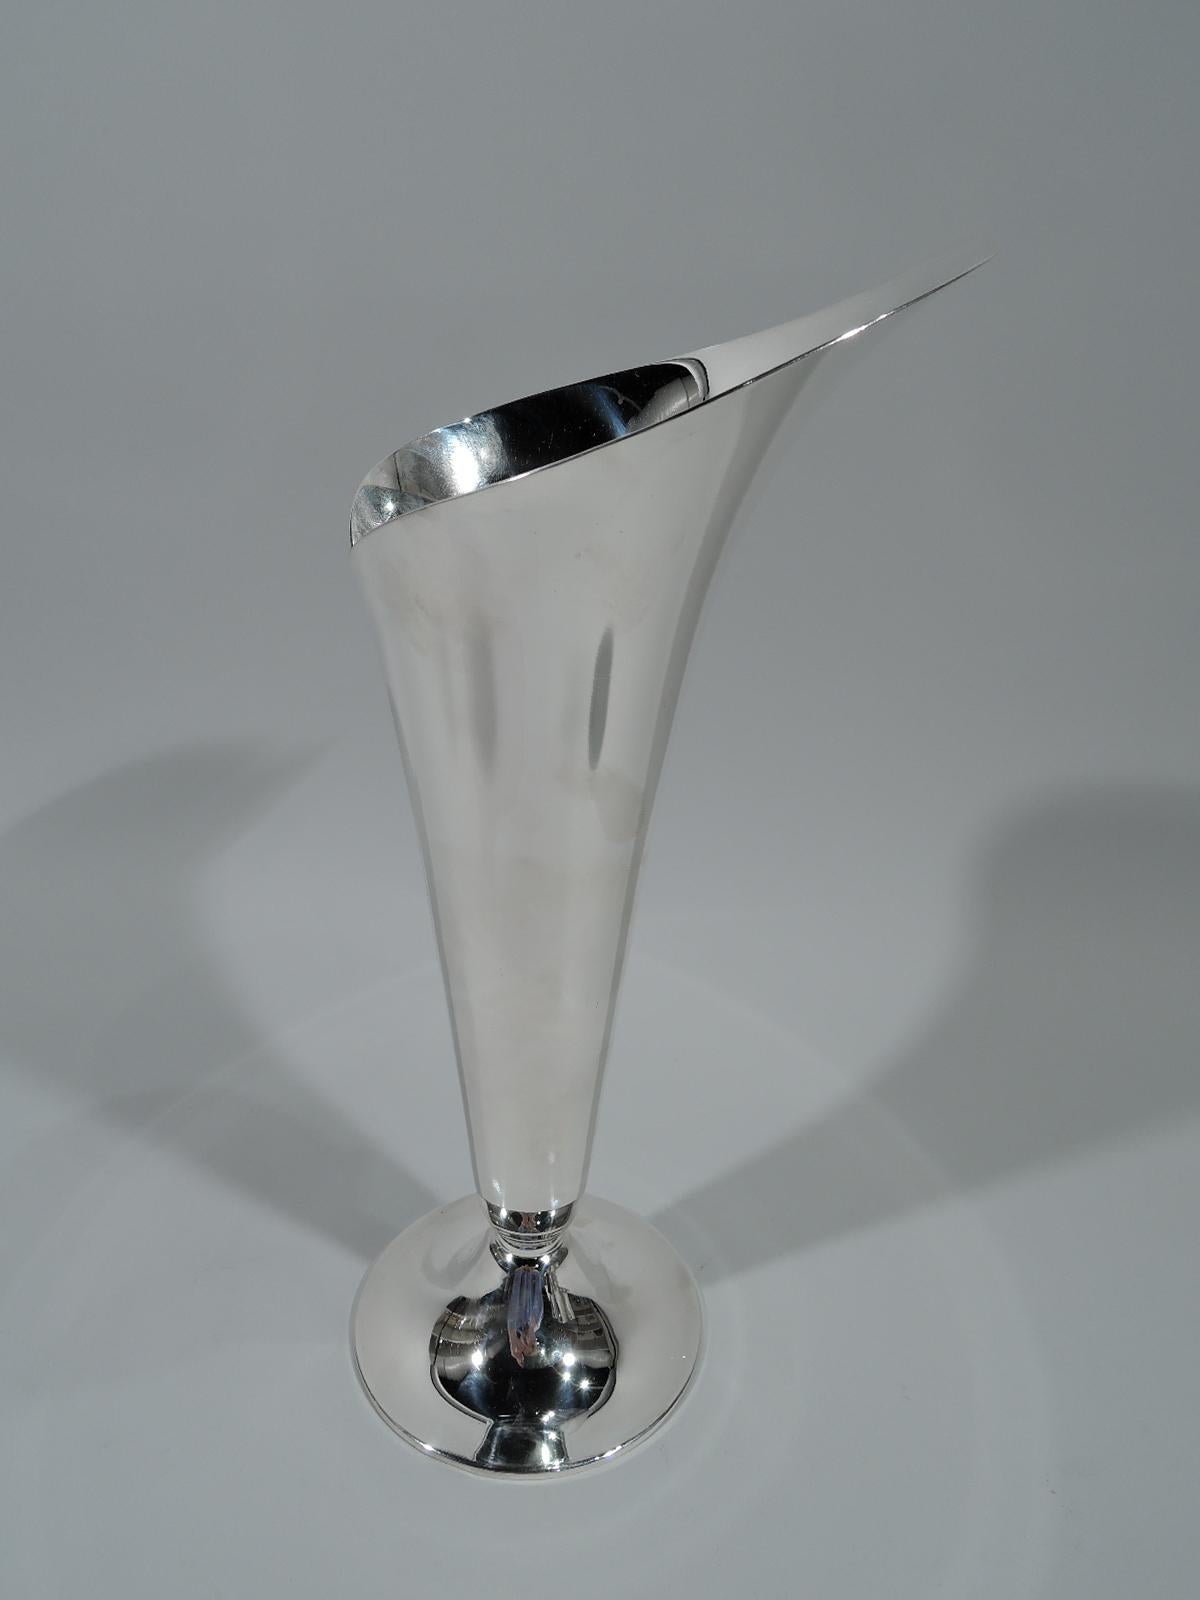 Mid-Century Modern sterling silver vase. Made by Tiffany & Co. in New York. In form of abstract wrapped leaf with asymmetrical mouth and irregular seam. Raised round foot. Hallmark includes postwar pattern no. 23425. Weight: 19 troy ounces.